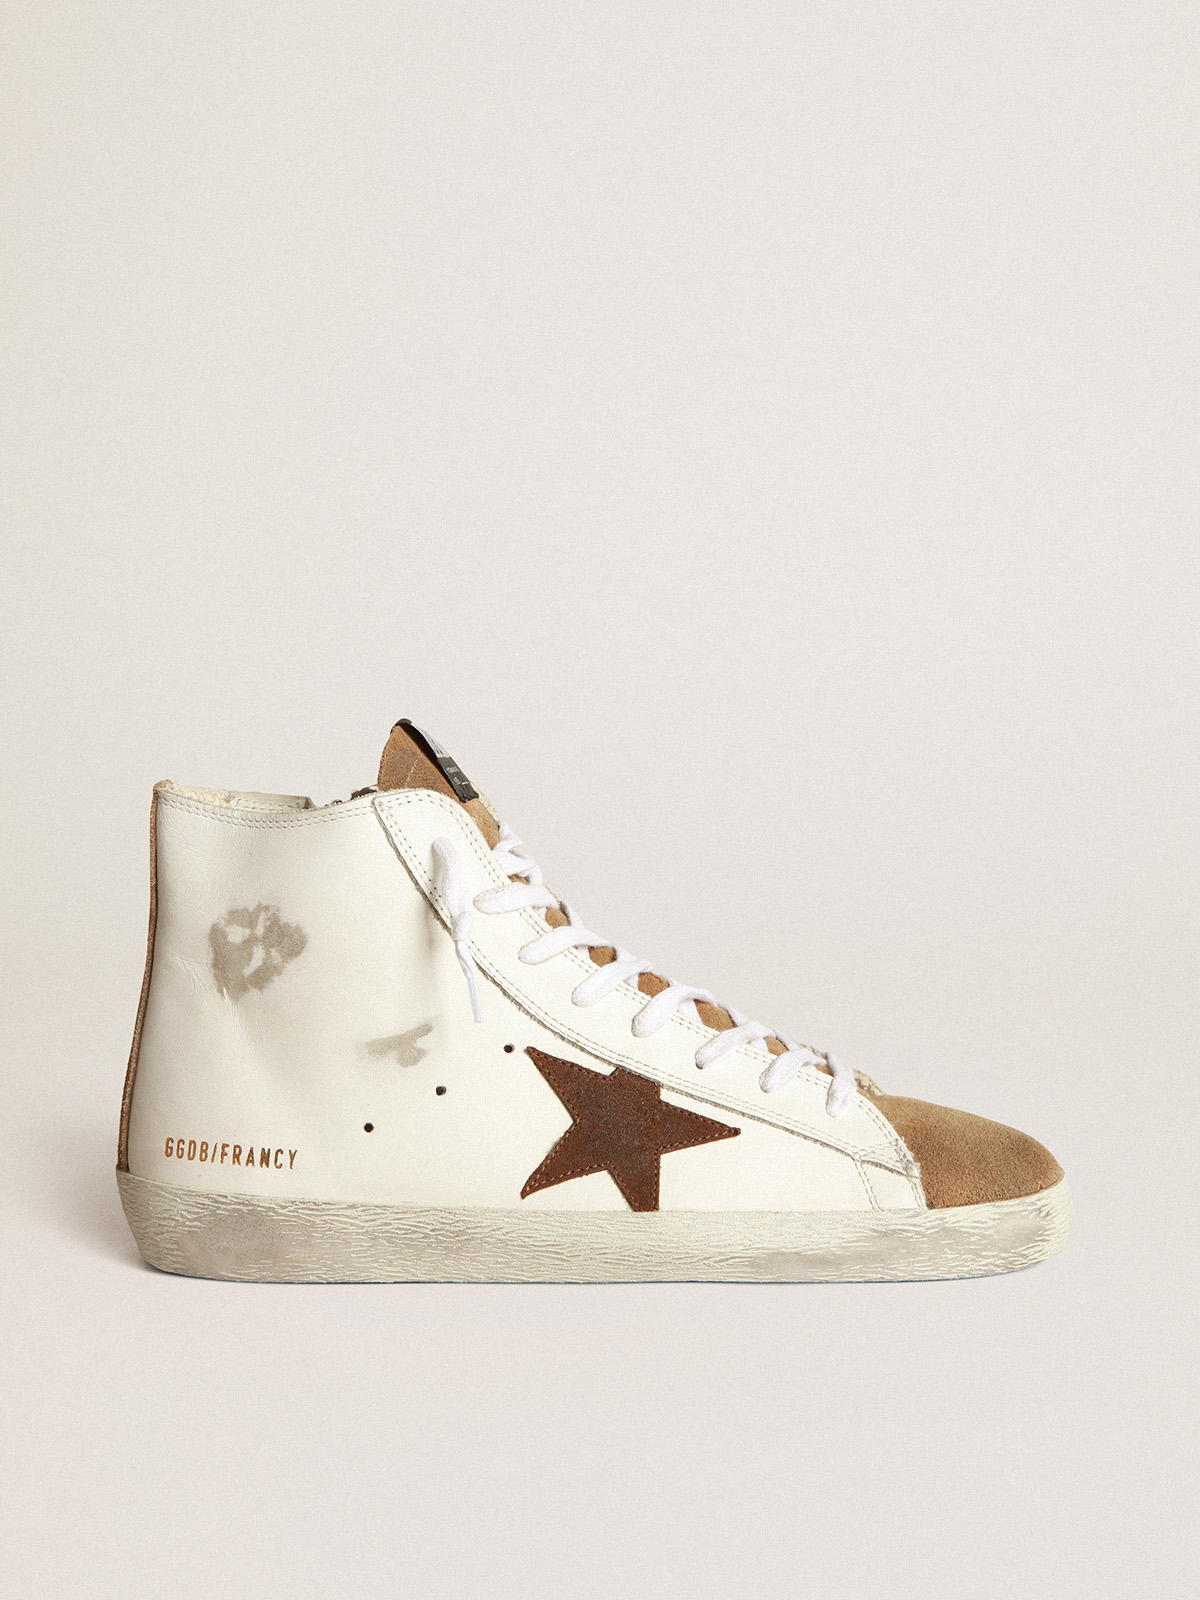 Francy sneakers in nude suede and white leather with contrast star | Golden  Goose